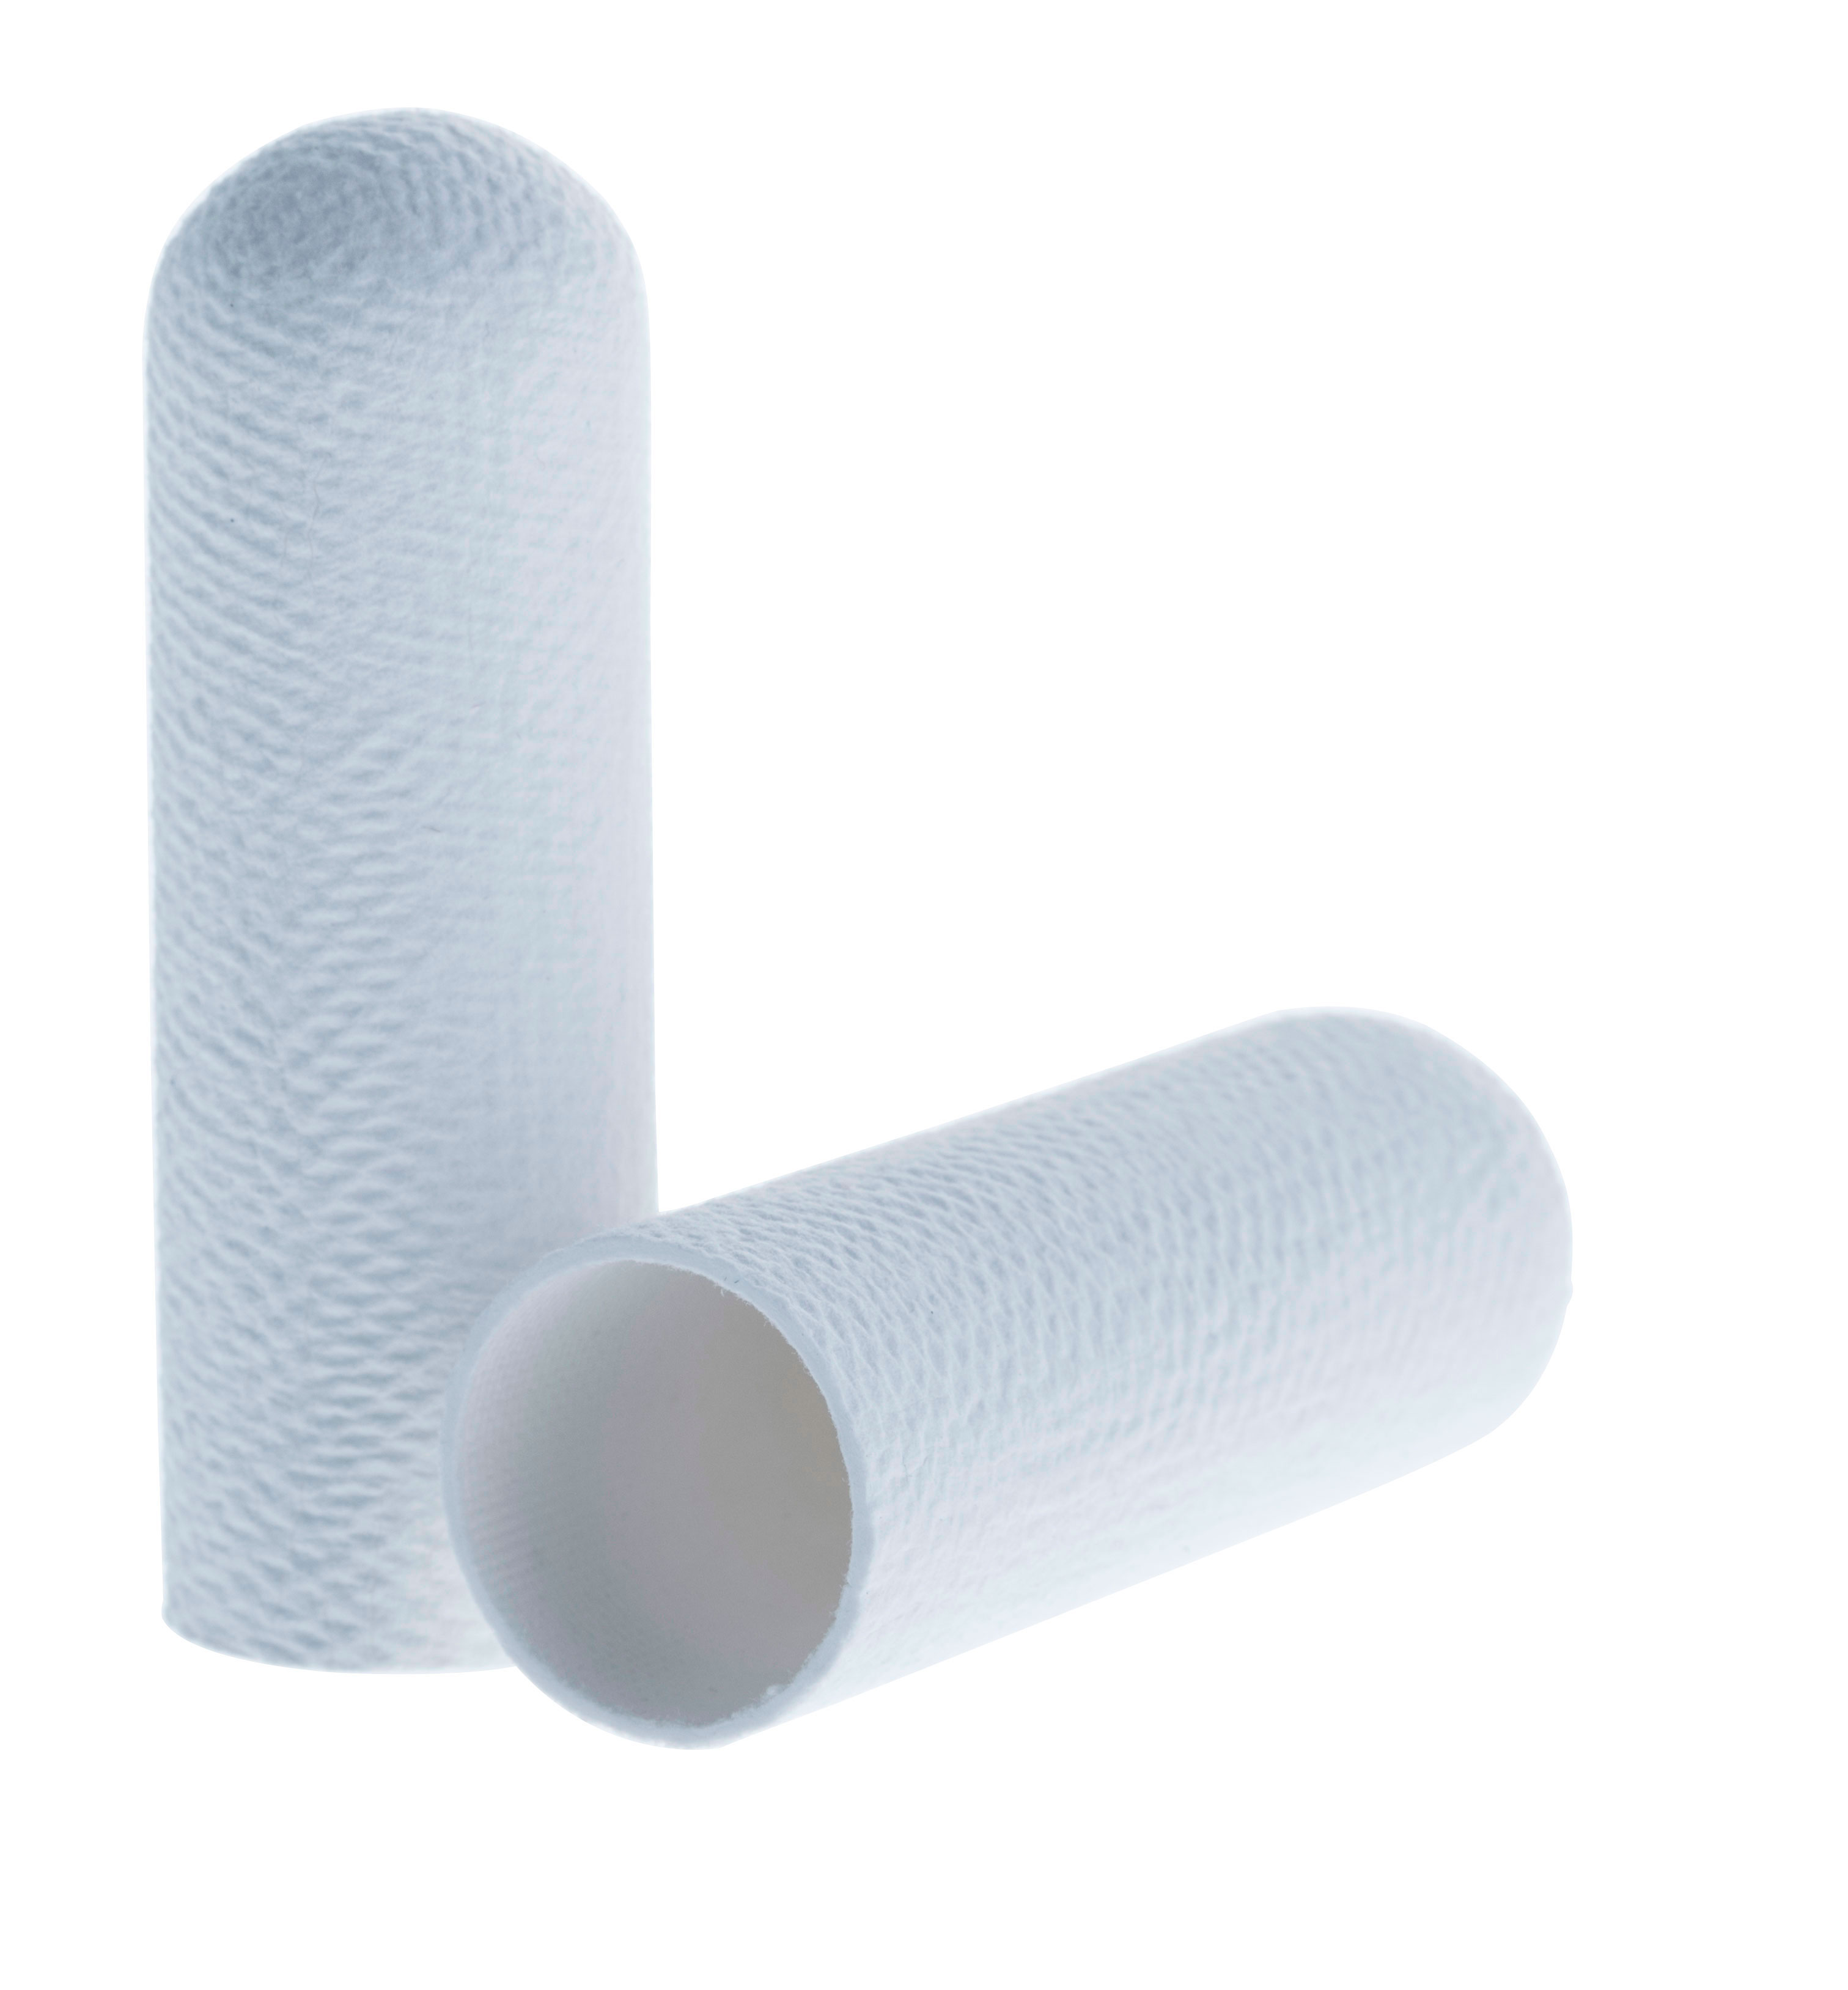 Cellulose extraction thimbles for Soxhlet extraction. SCHARLAU. Standard cellulose cartridge. Dim. Øxlength: 30x100mm. Particle retention in liquid: Nom. 8-15 microns